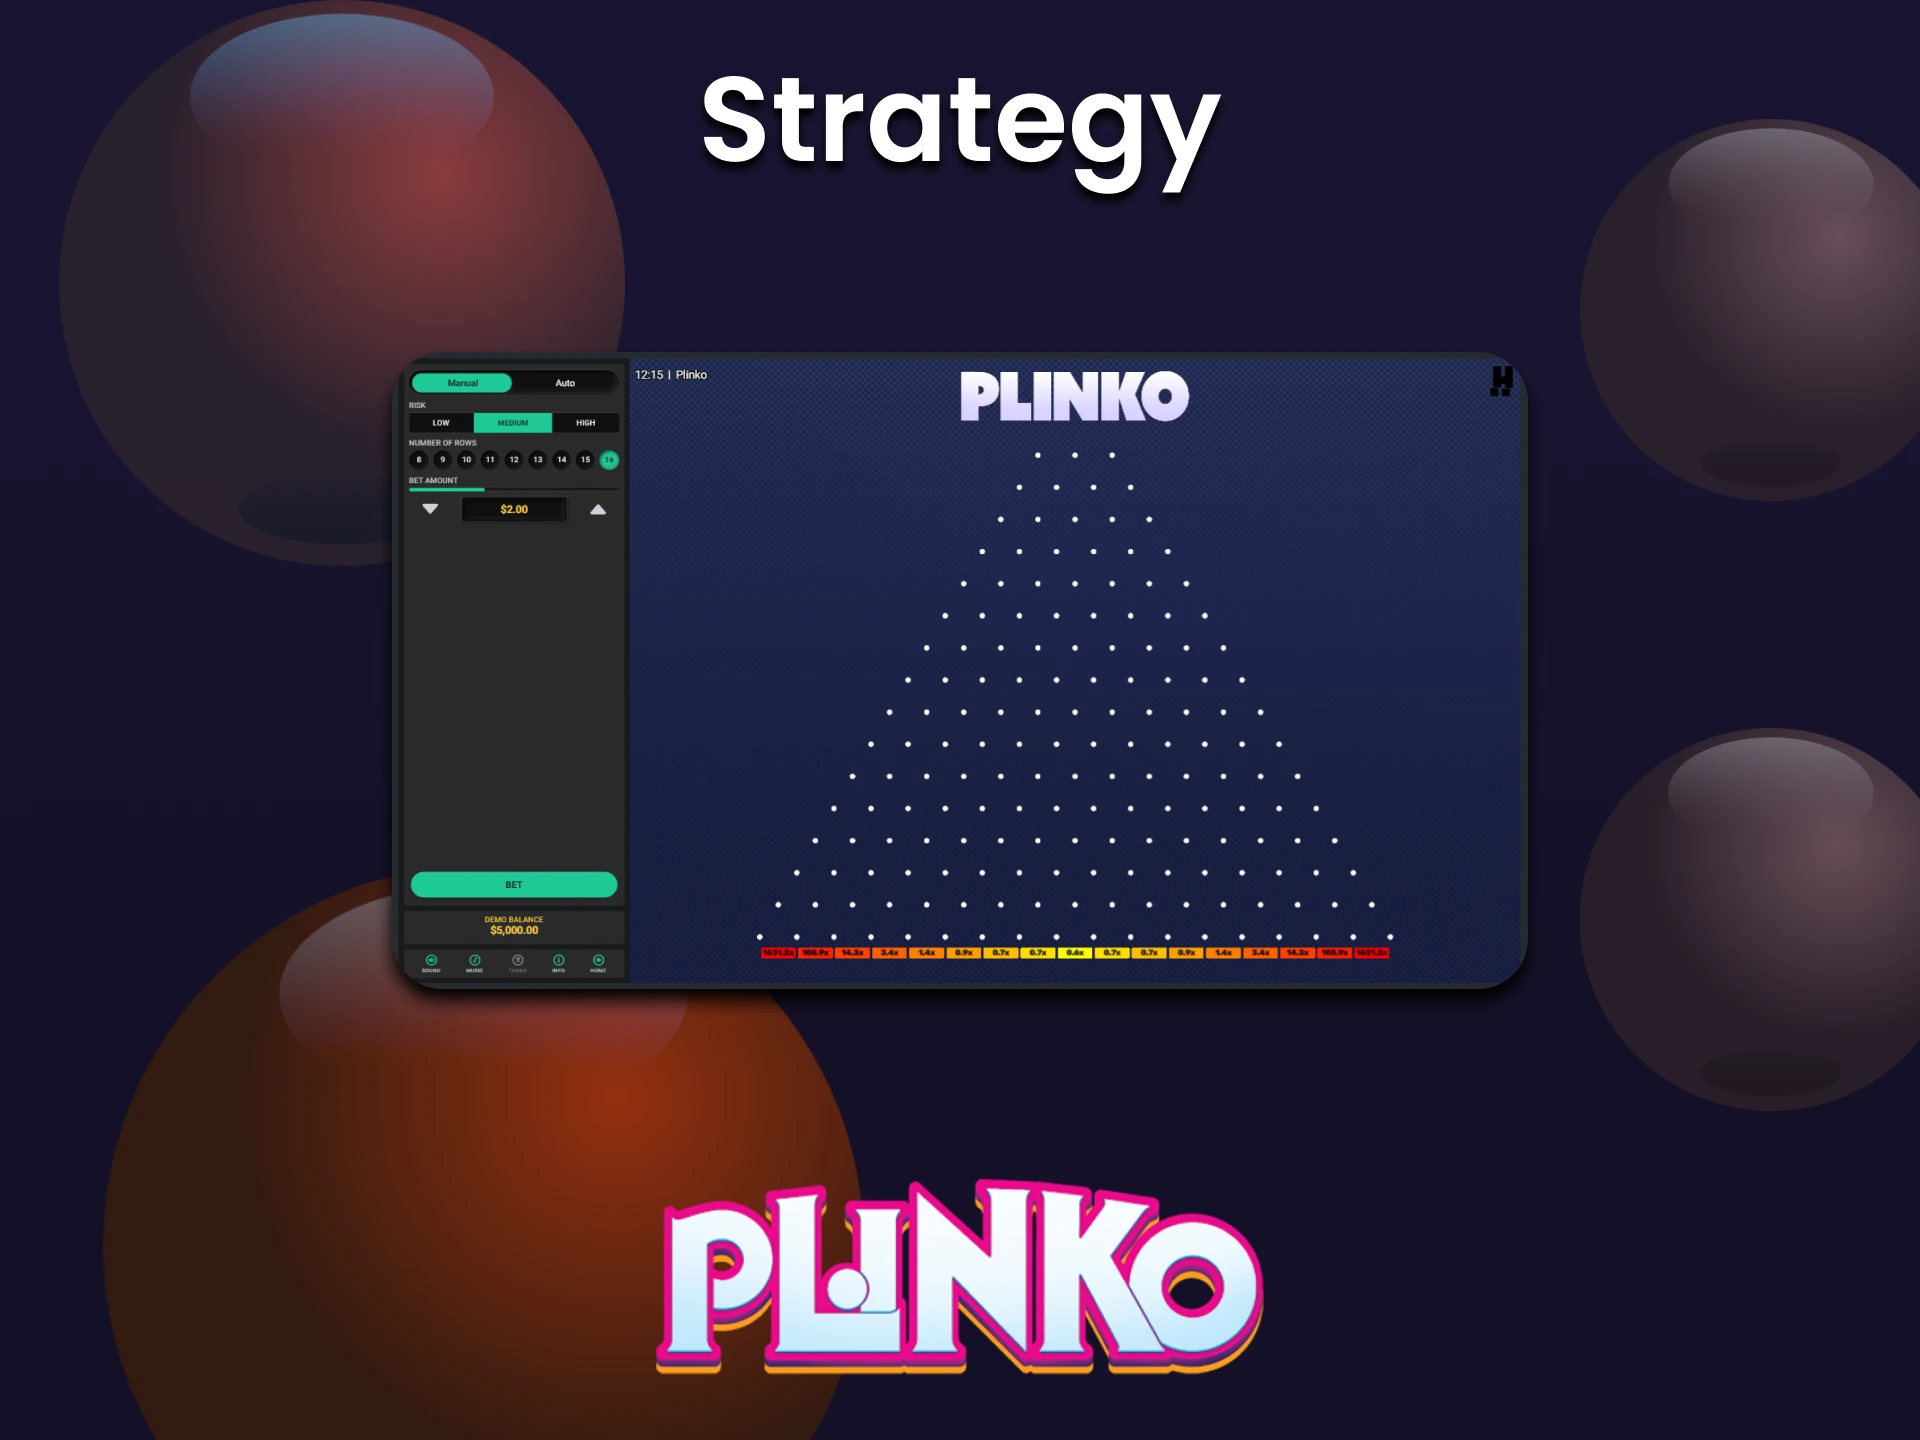 Choose the right strategy to win the Plinko game.